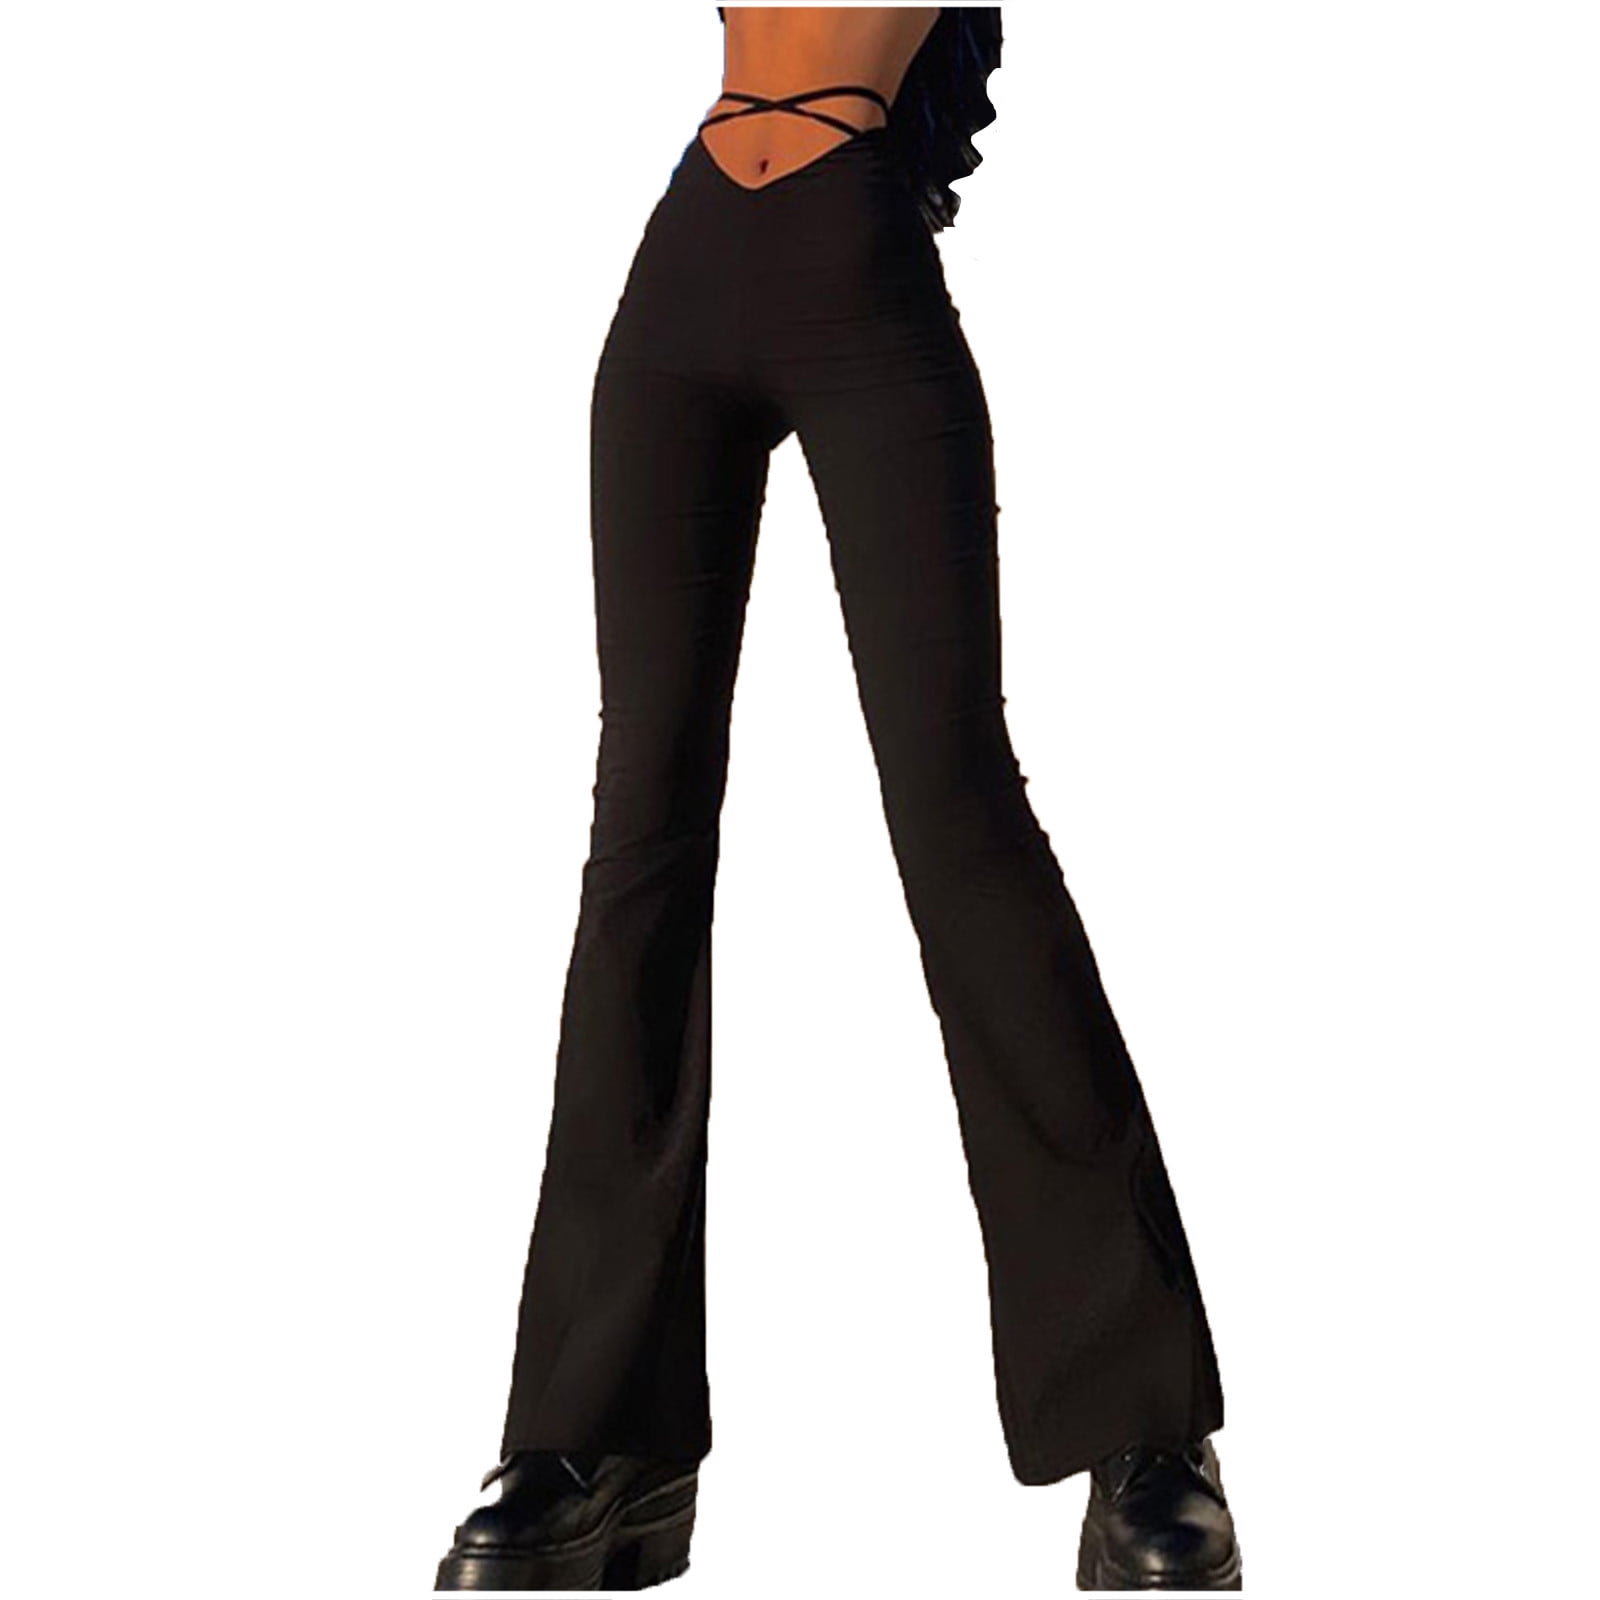 YYDGH Women's Cut Out Flare Pants V-Waisted Cropped Cross Elastic